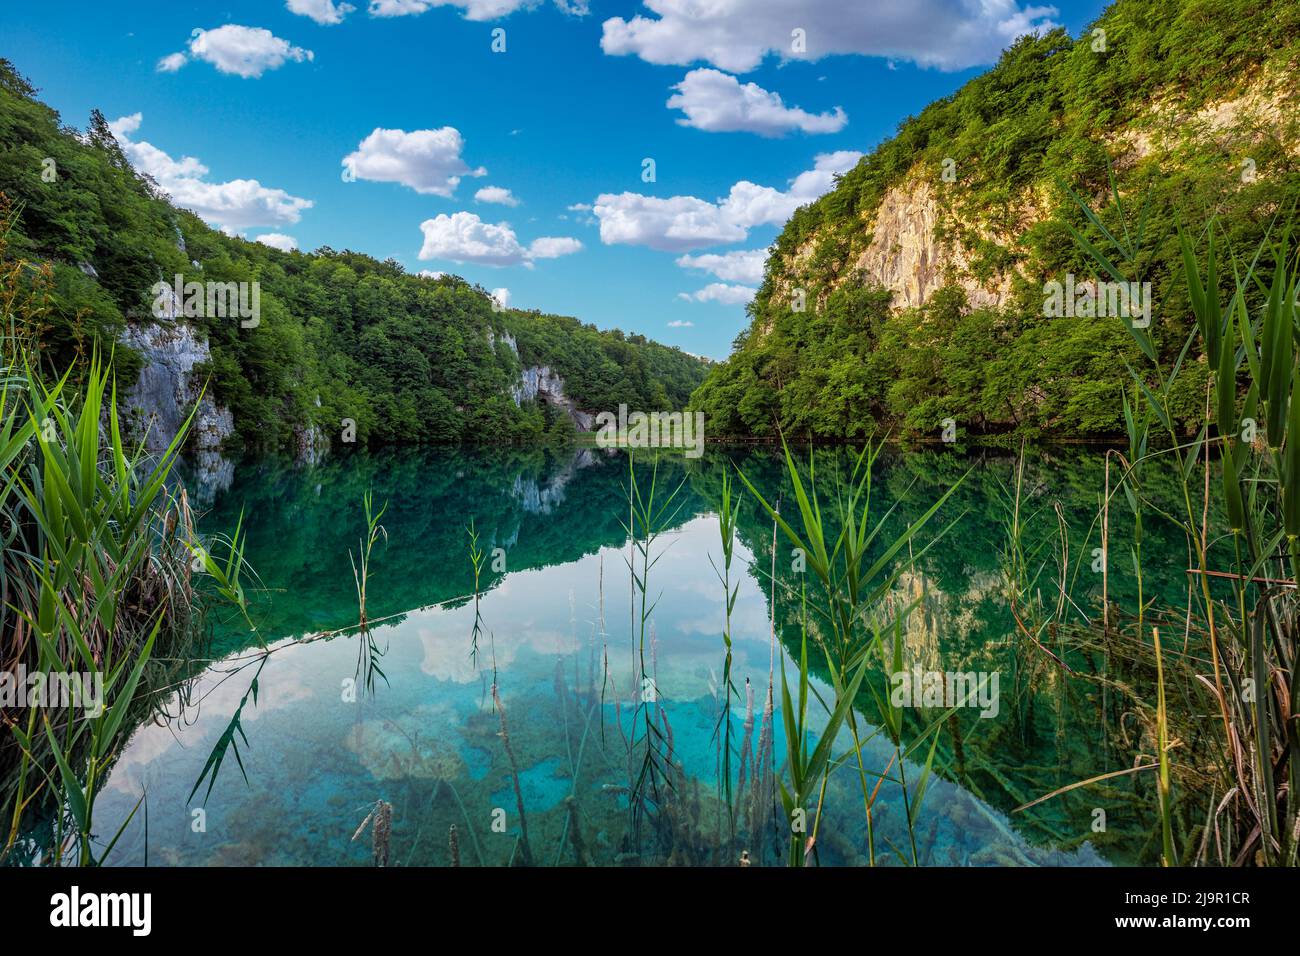 Plitvice, Croatia - Reflecting Plitvice Lakes National Park on a bright summer day with crystal clear turquoise water, blue sky and clouds and green s Stock Photo